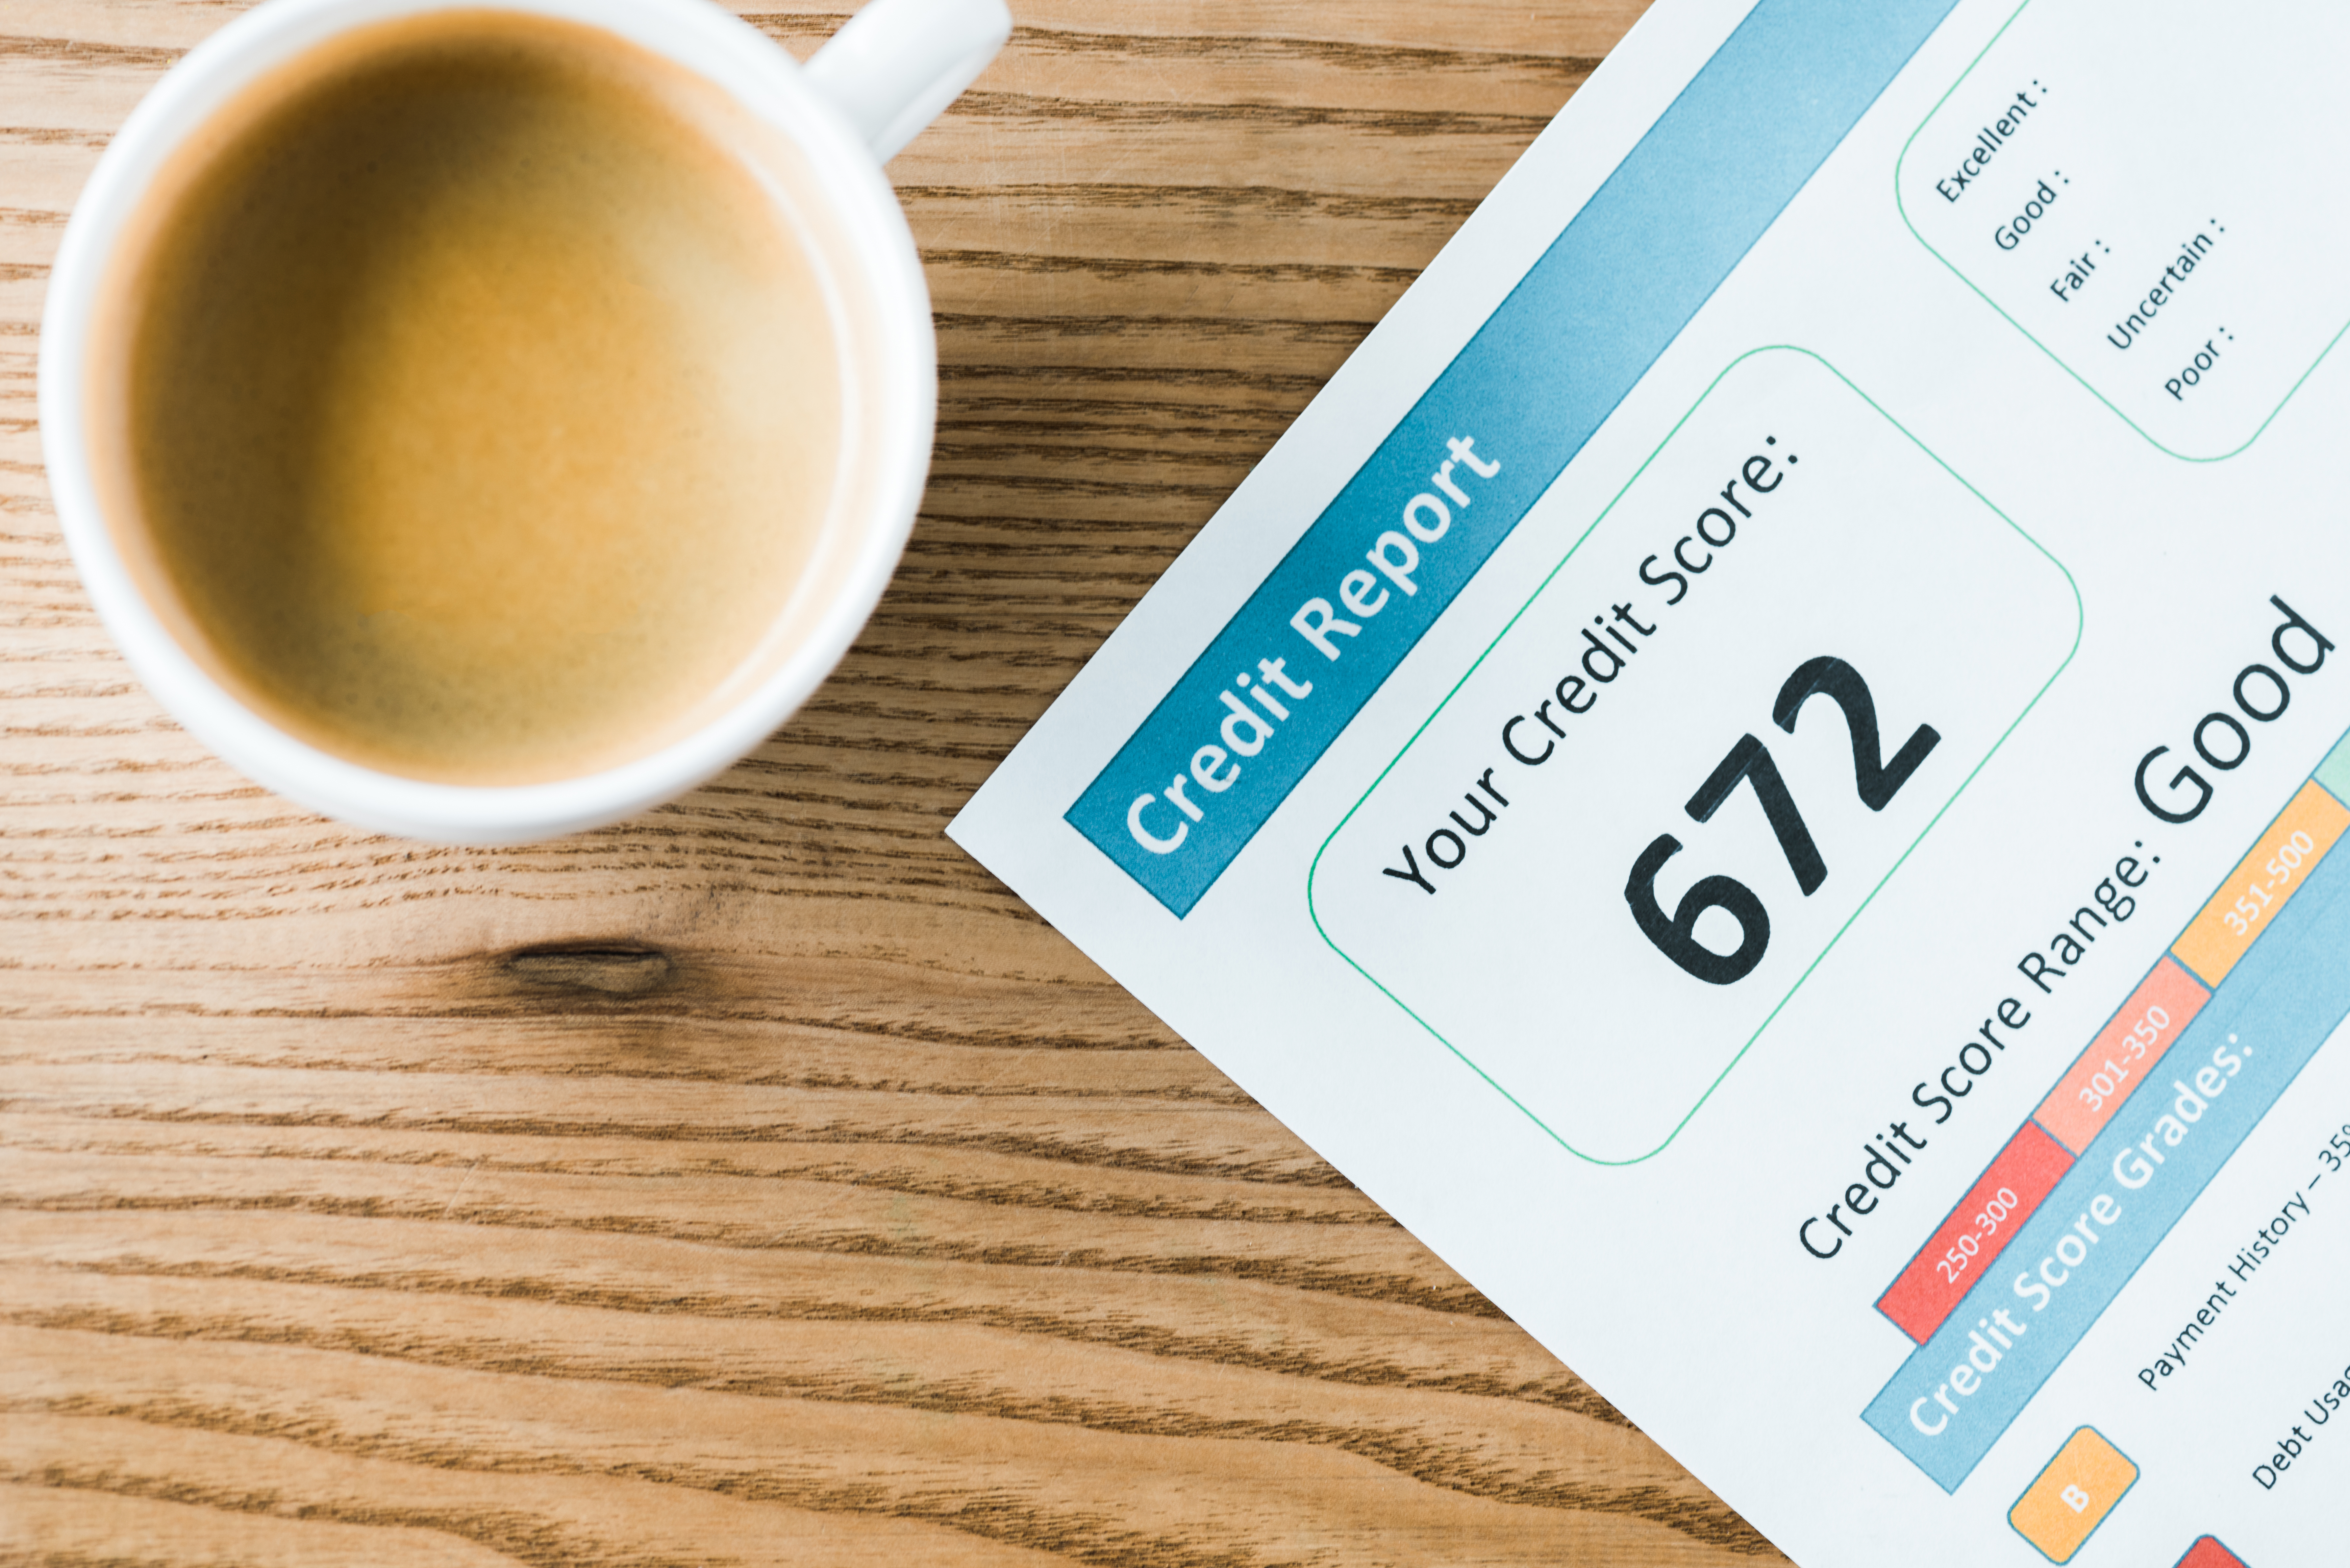 Does Consolidating Debt Affect My Credit Score?